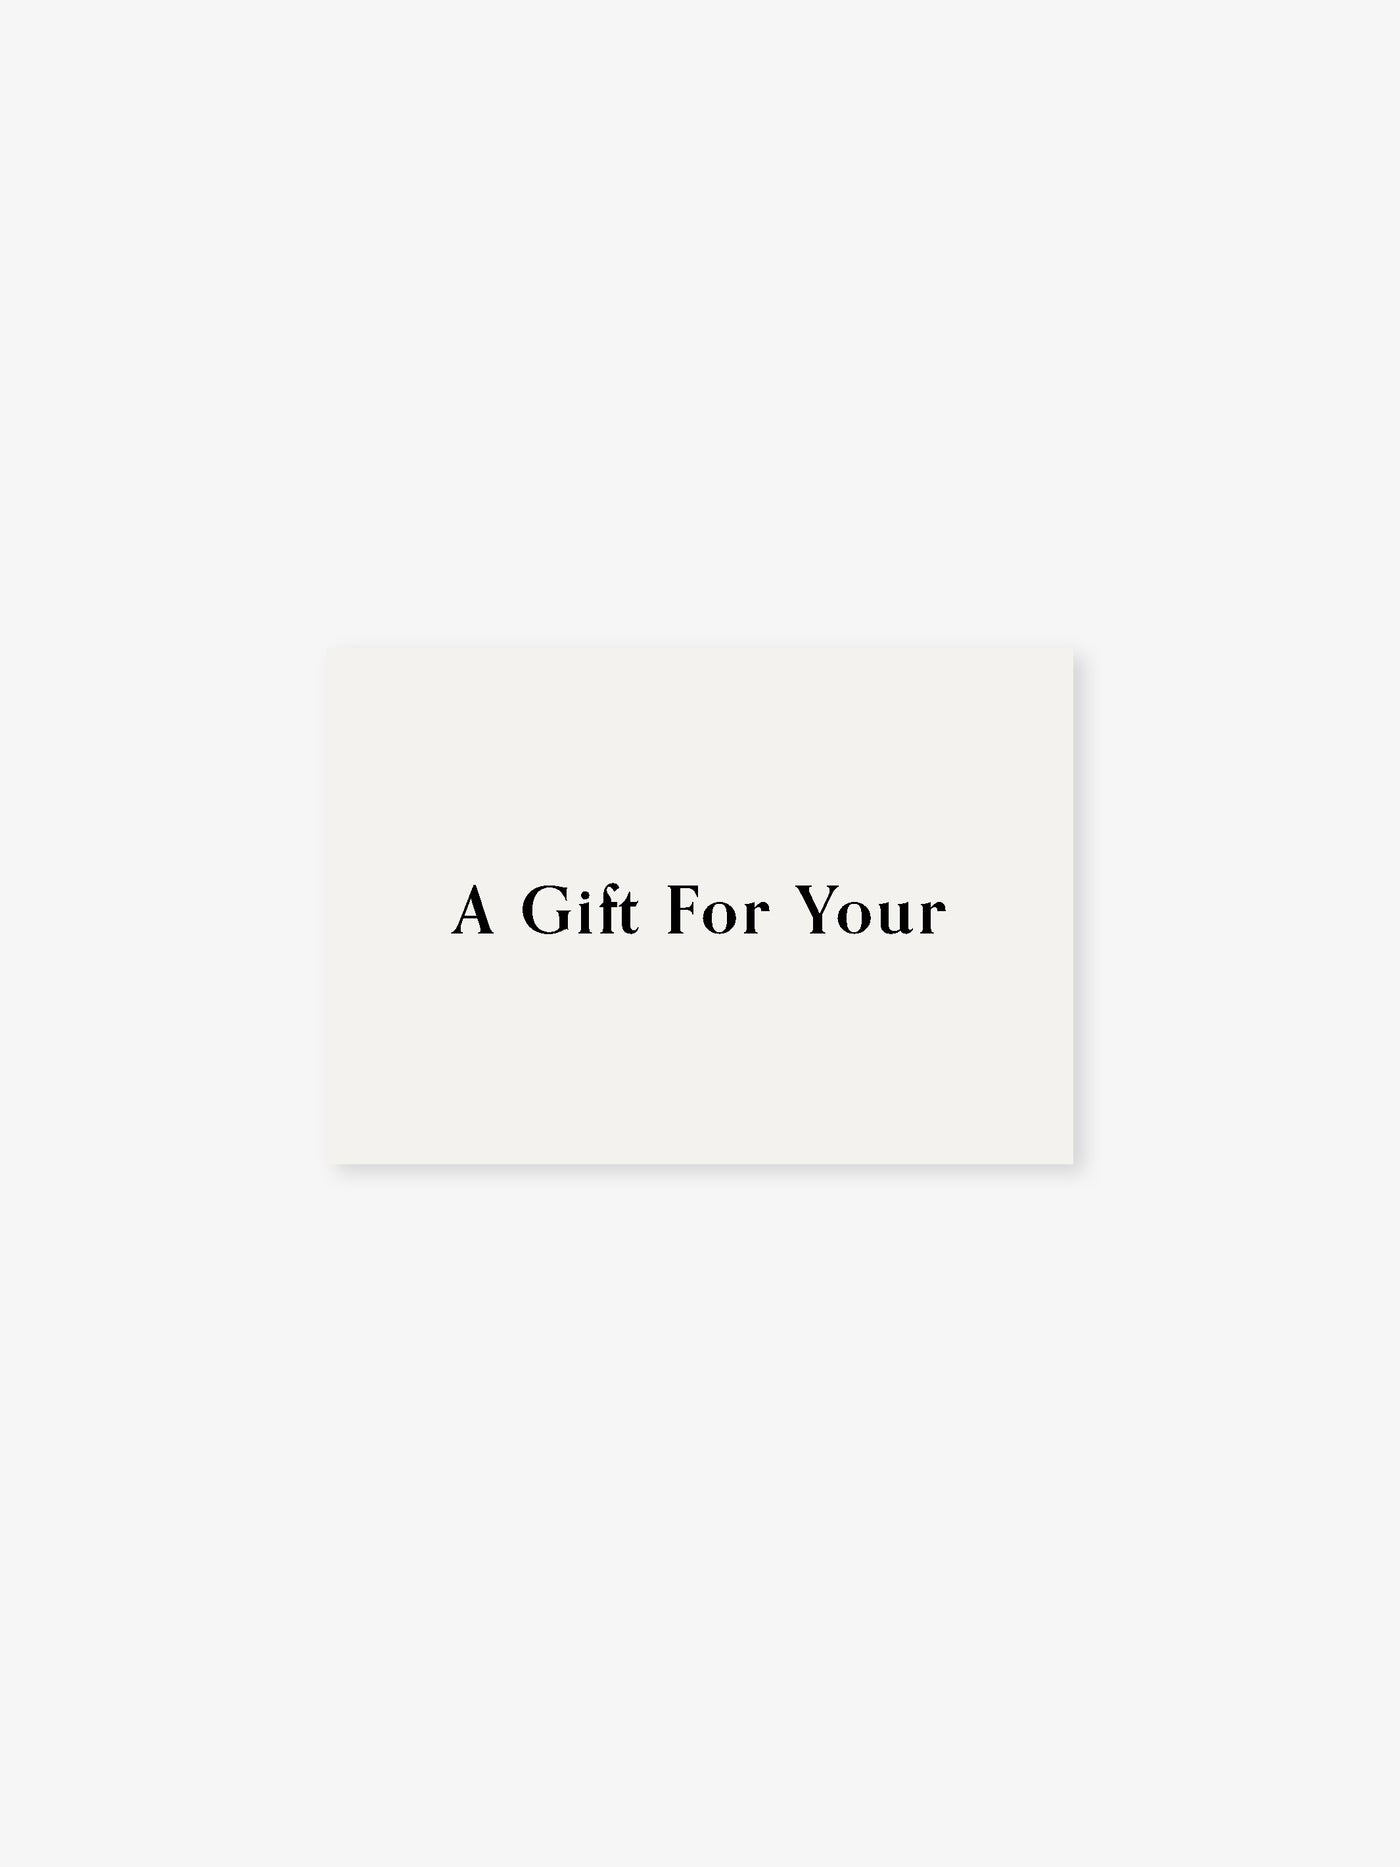 Gift card to The Ateljé (physical)